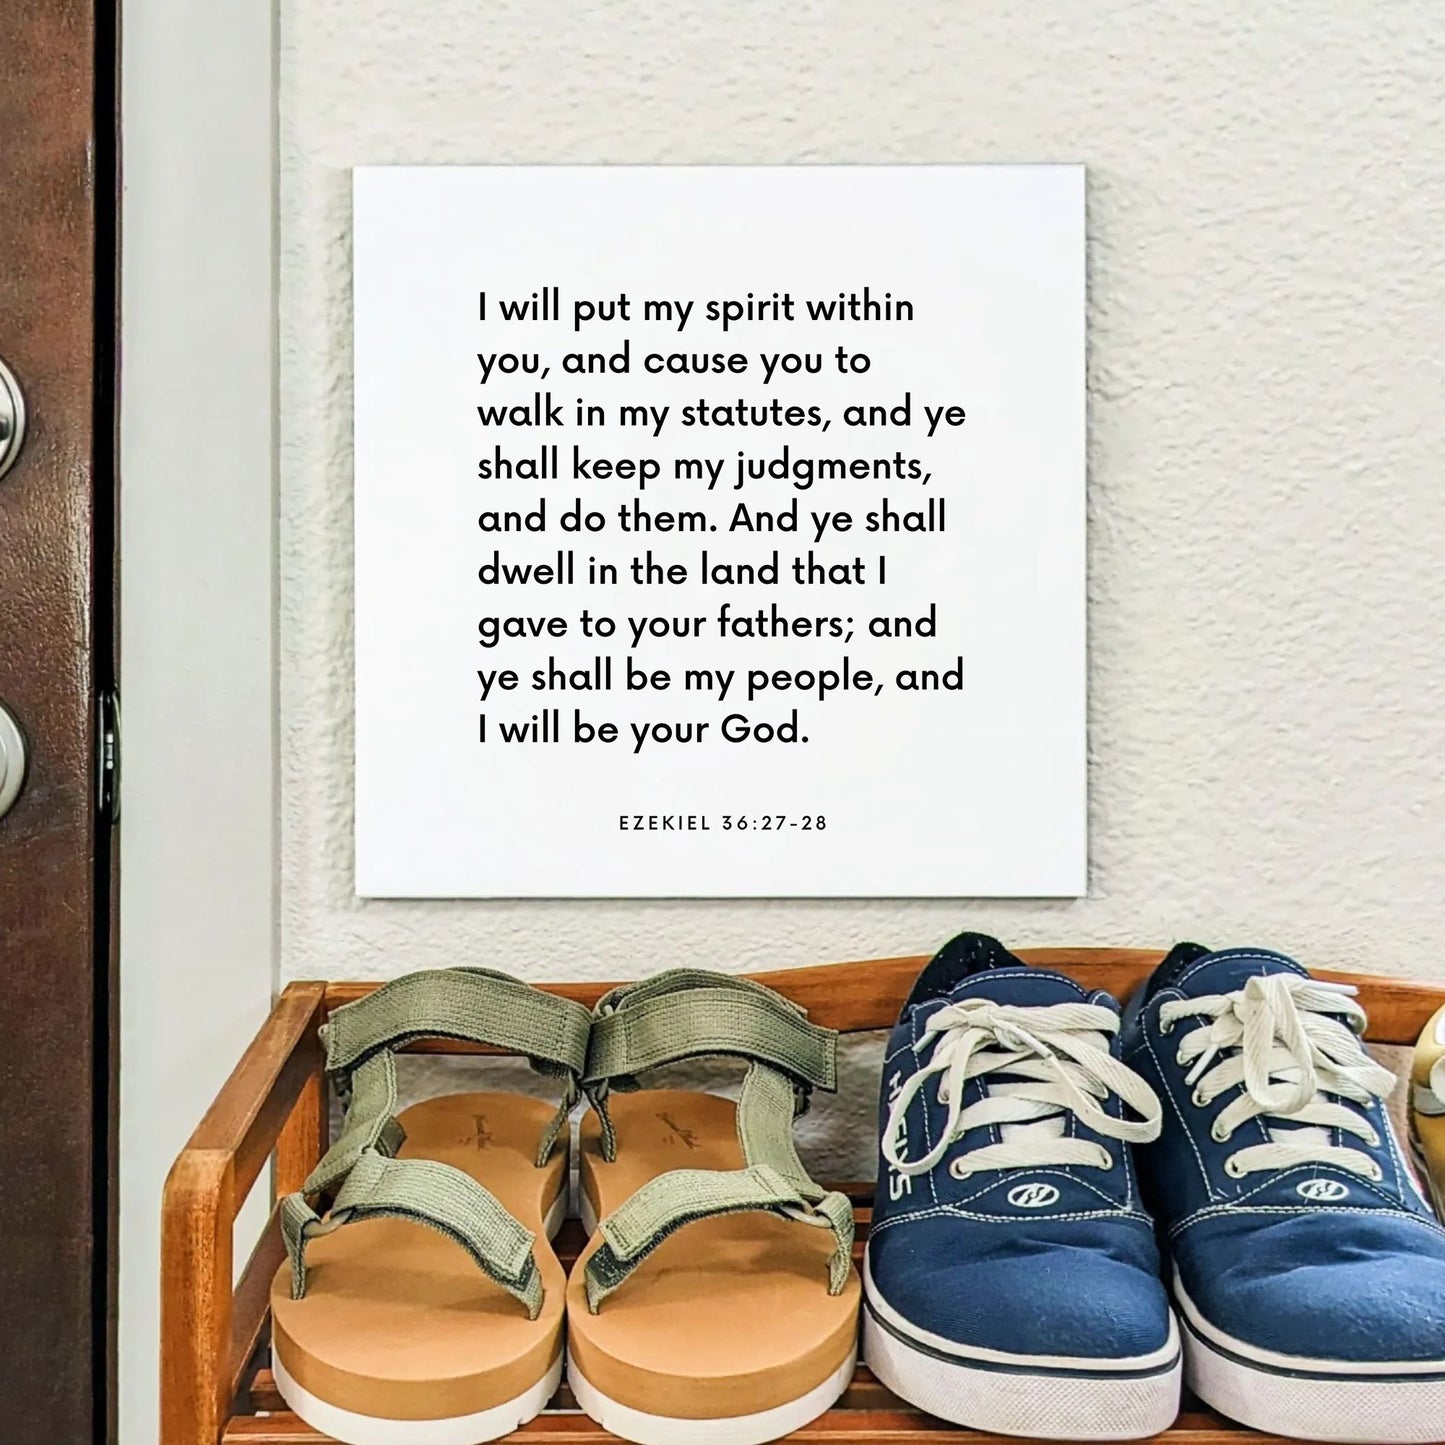 Shoes mouting of the scripture tile for Ezekiel 36:27-28 - "I will put my spirit within you"